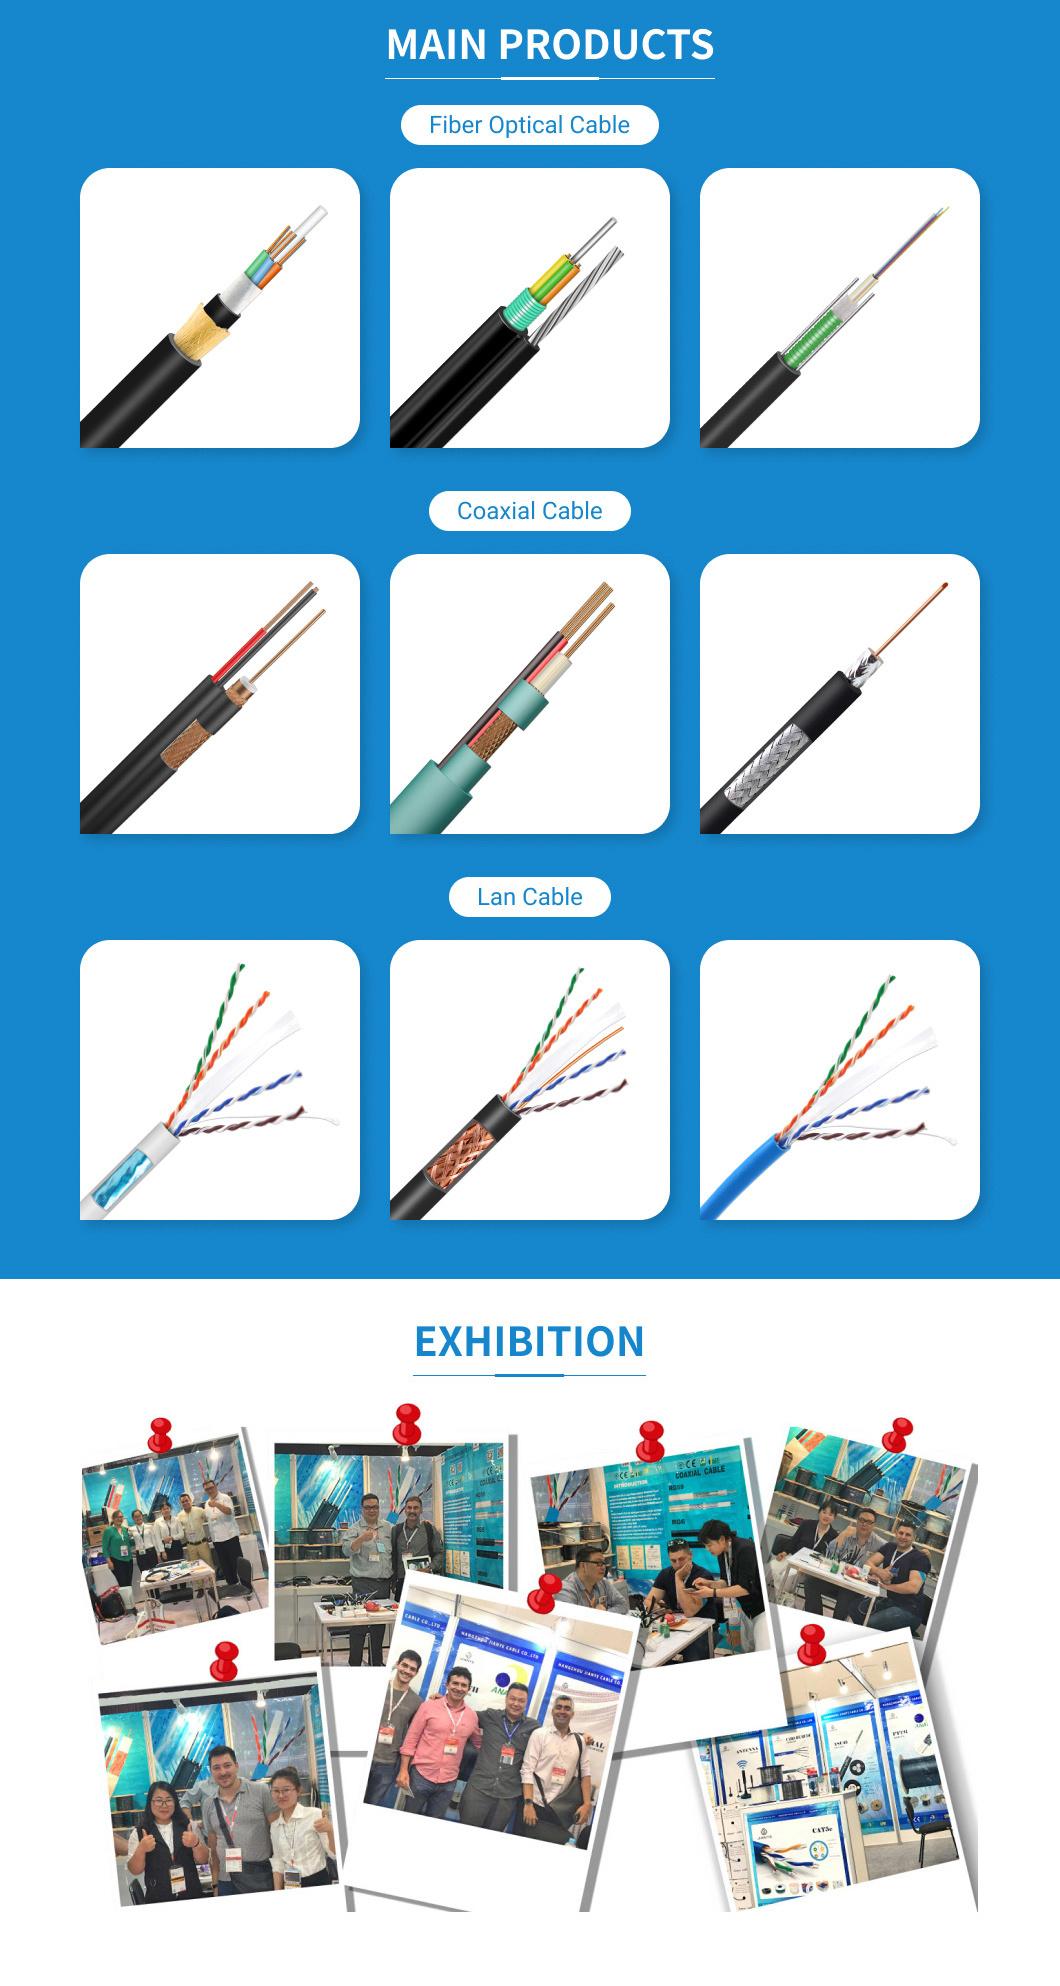 Bare Copper CCA Conductor Cat 6 UTP CAT6 CCTV Security Camera Networking Communication LAN Cable